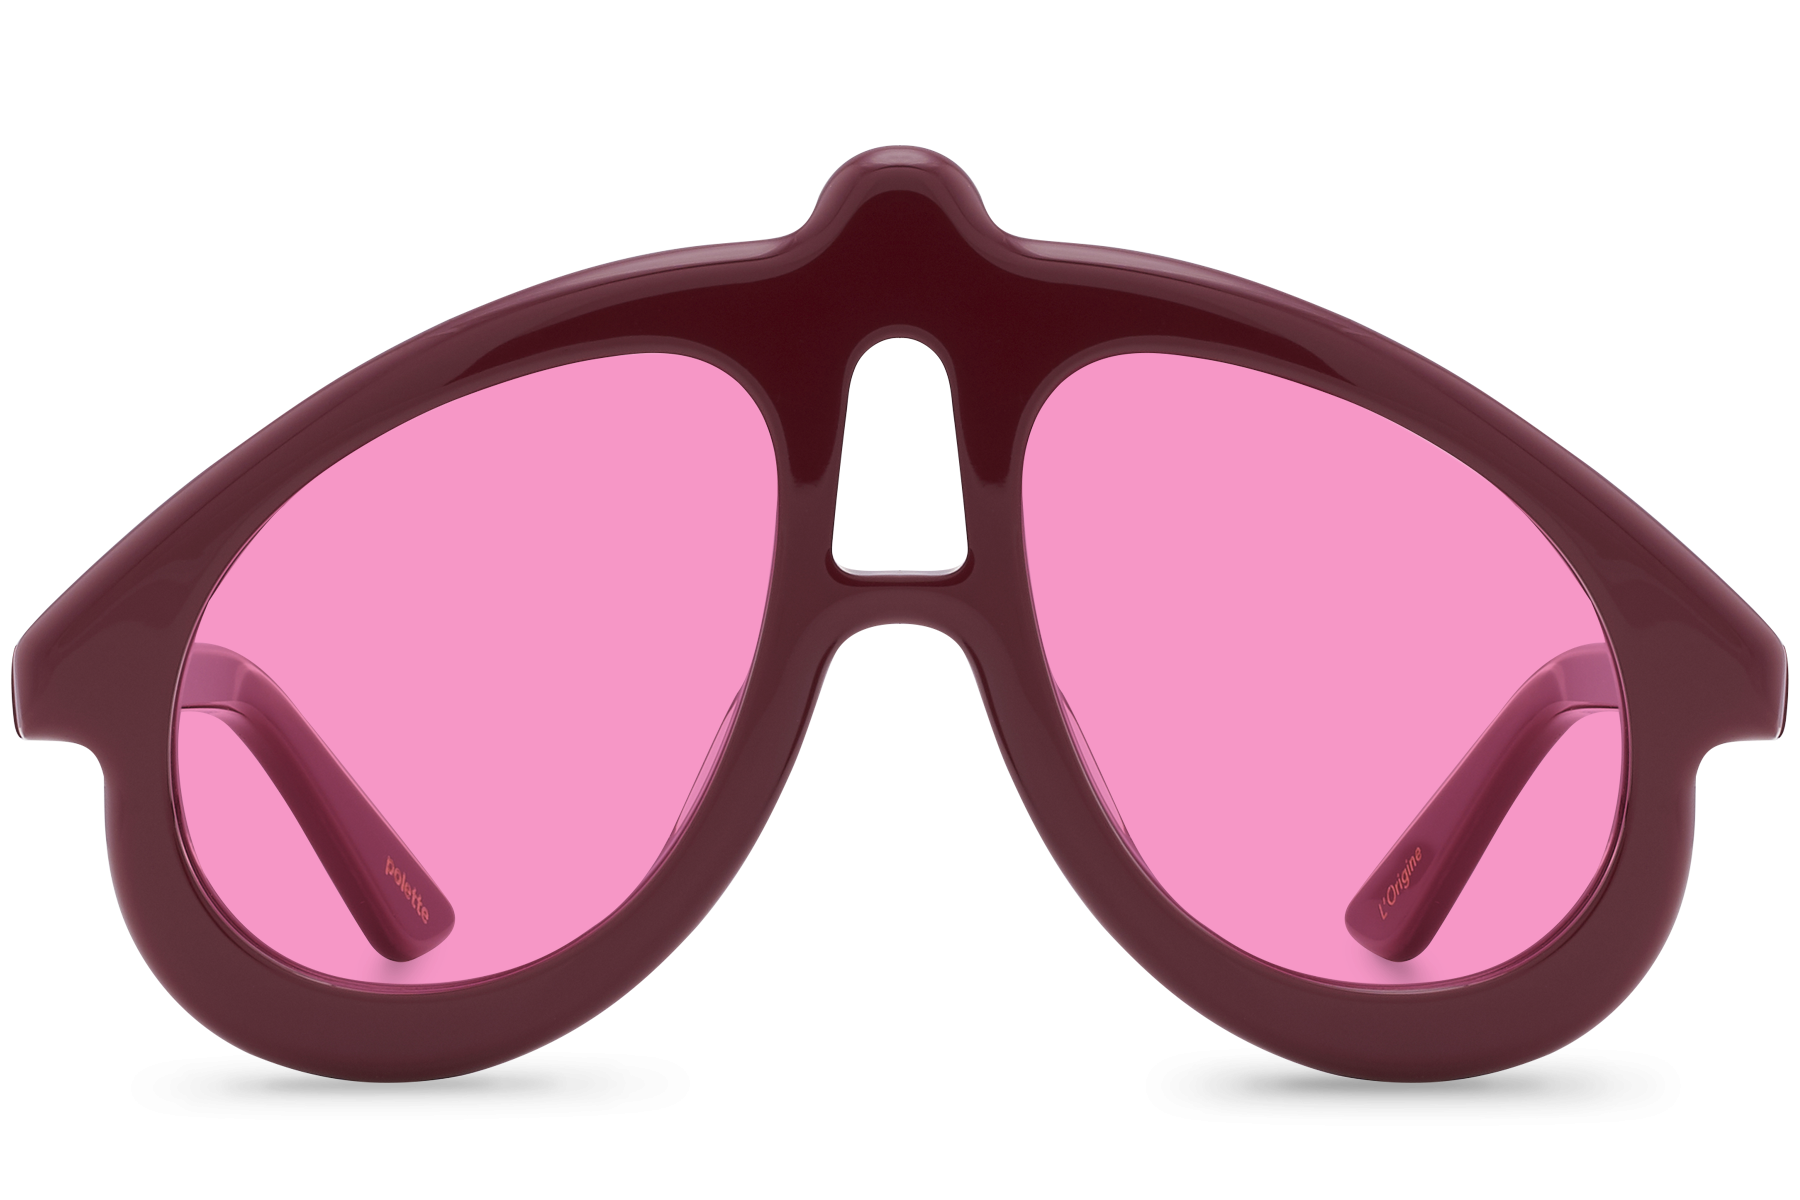 Download Sunglasses, Glasses, Shades. Royalty-Free Vector Graphic - Pixabay